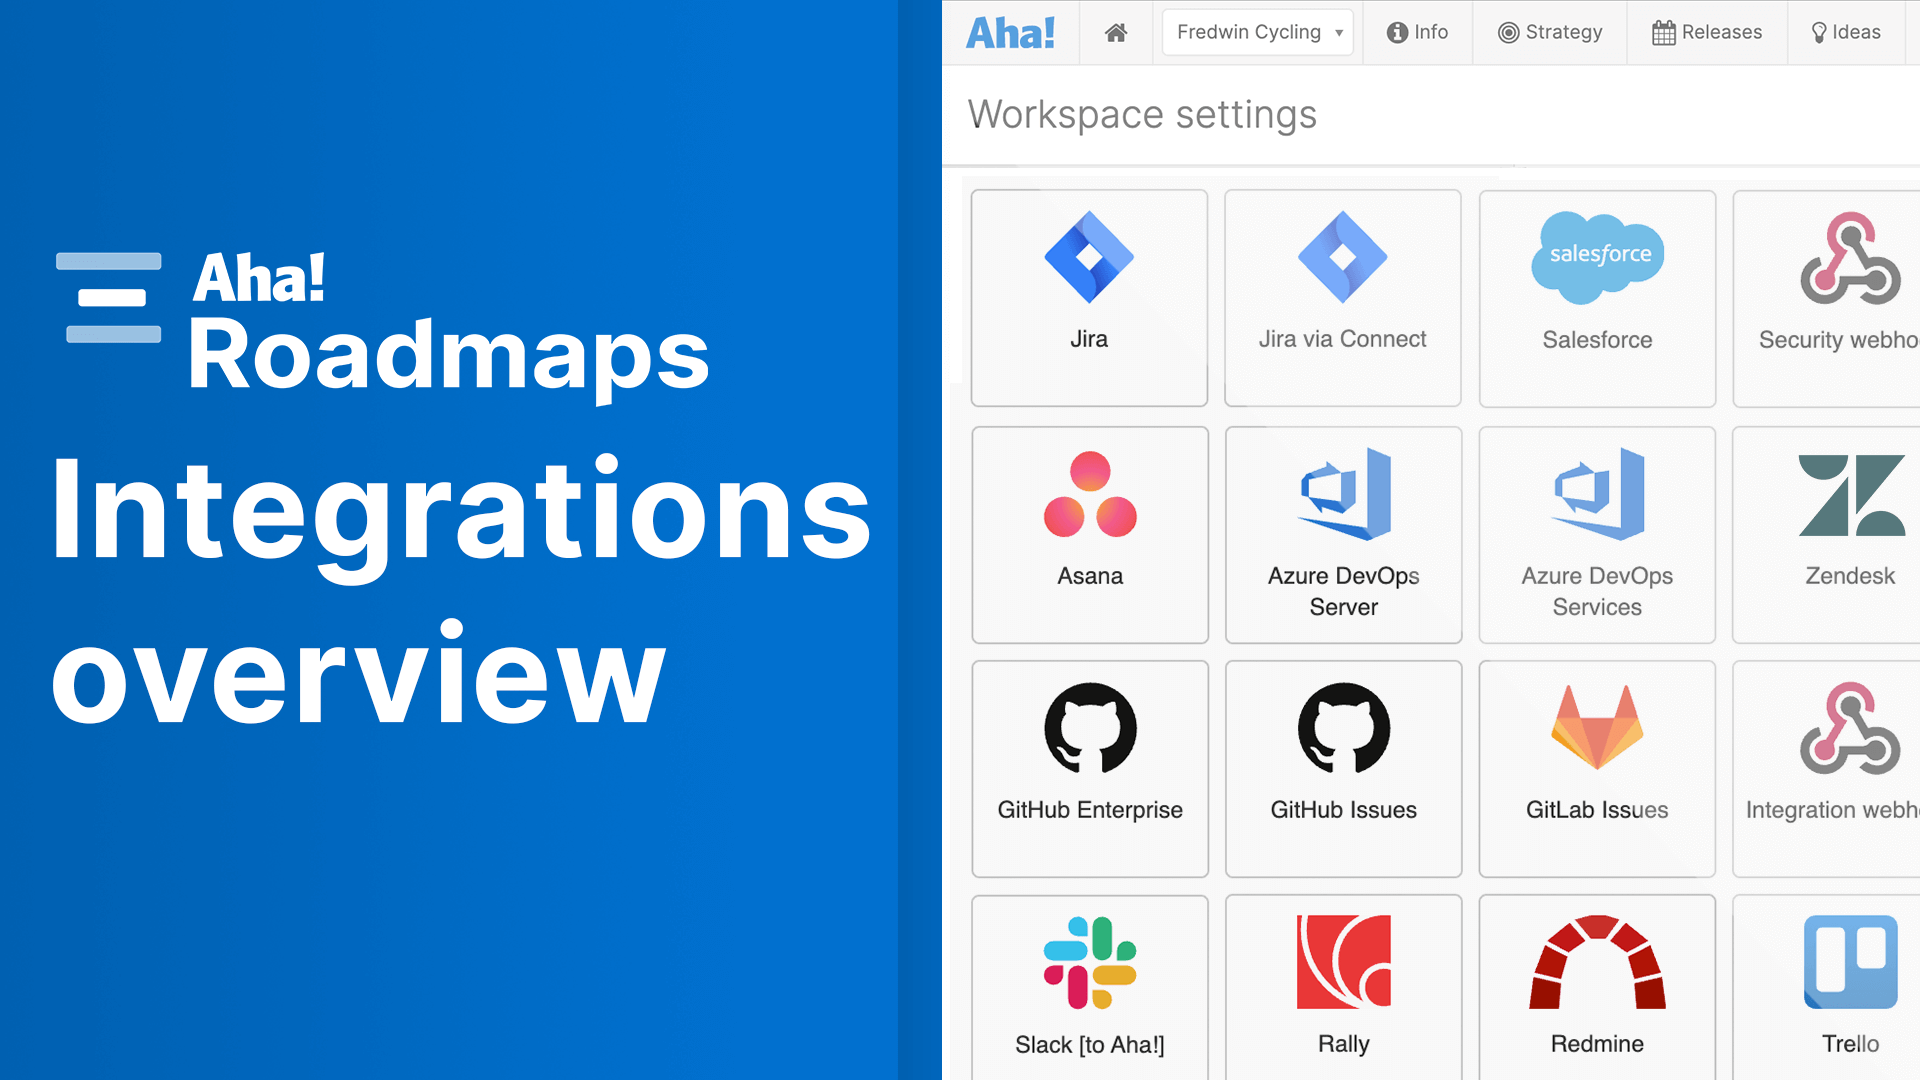 Thumbnail image for the Aha! Roadmaps integrations overview video